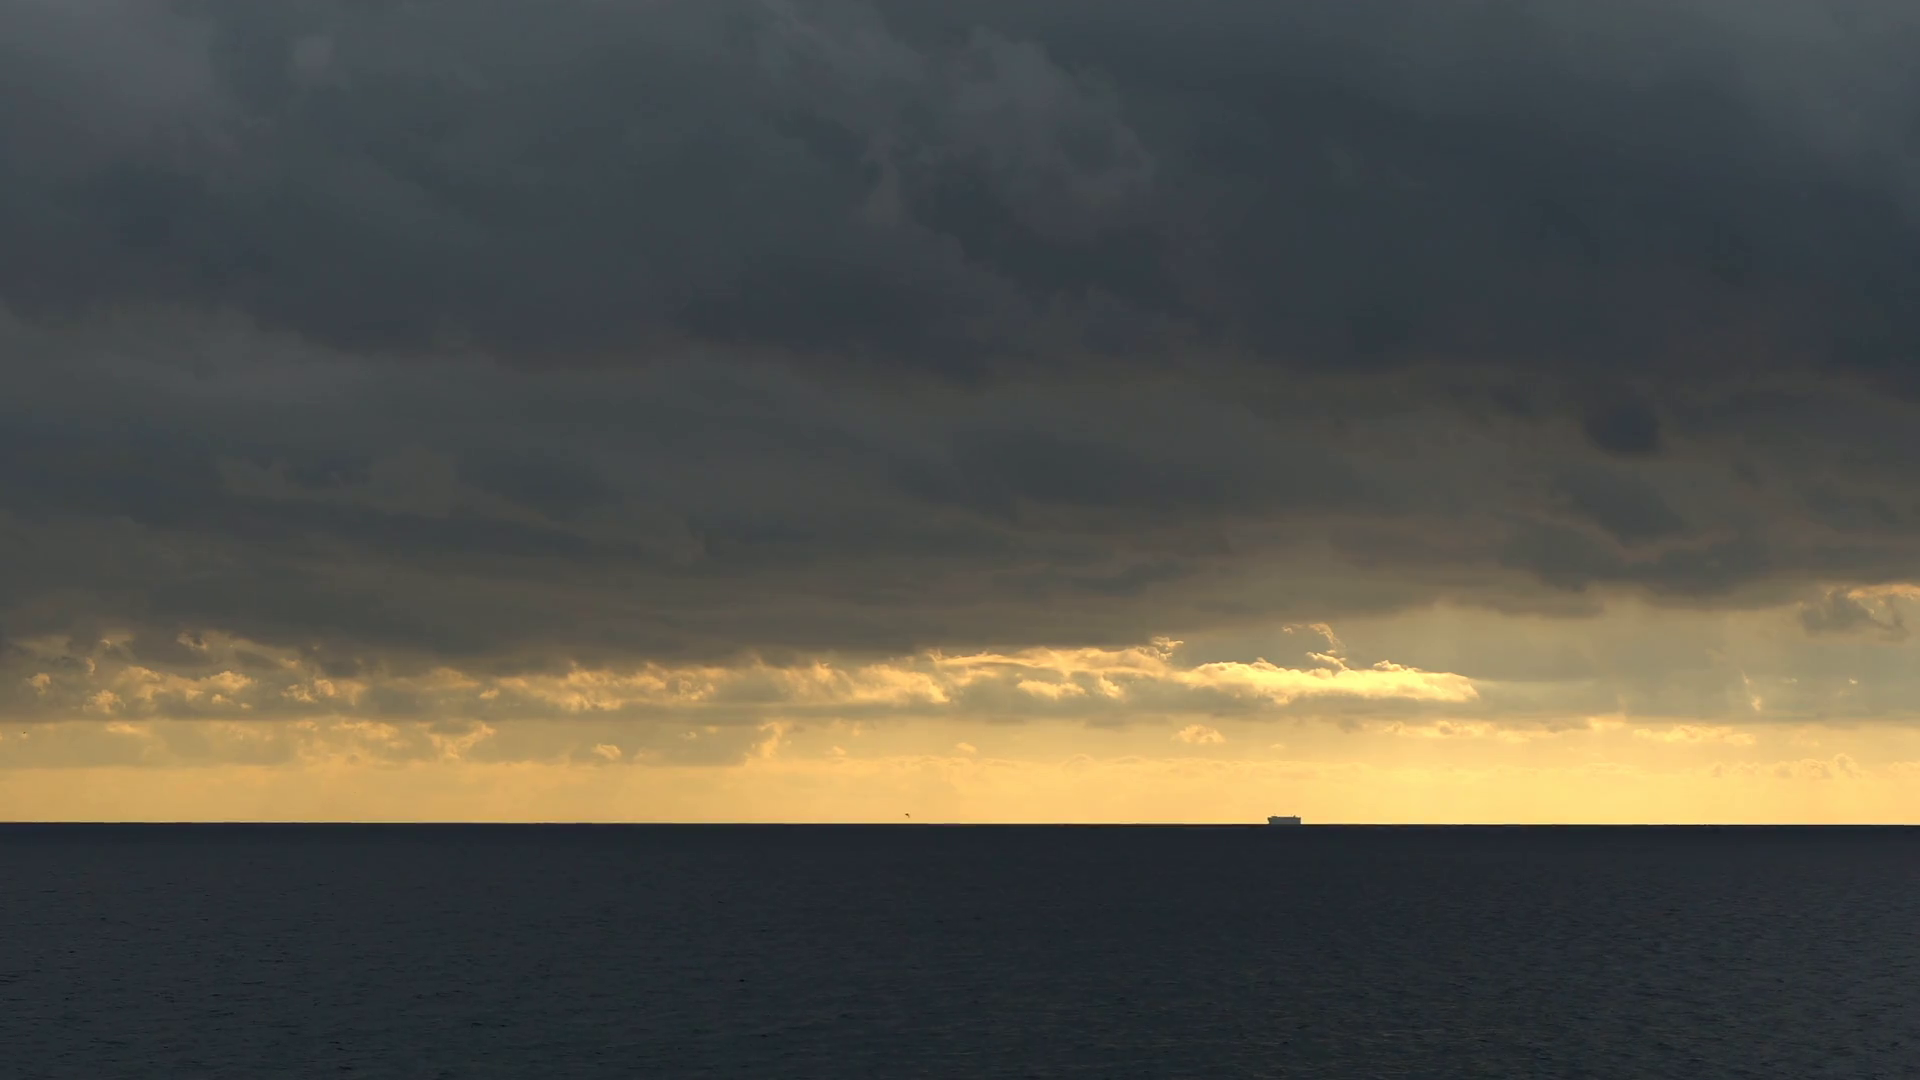 Cloudy evening at the seaside with a large ship far away over the ...